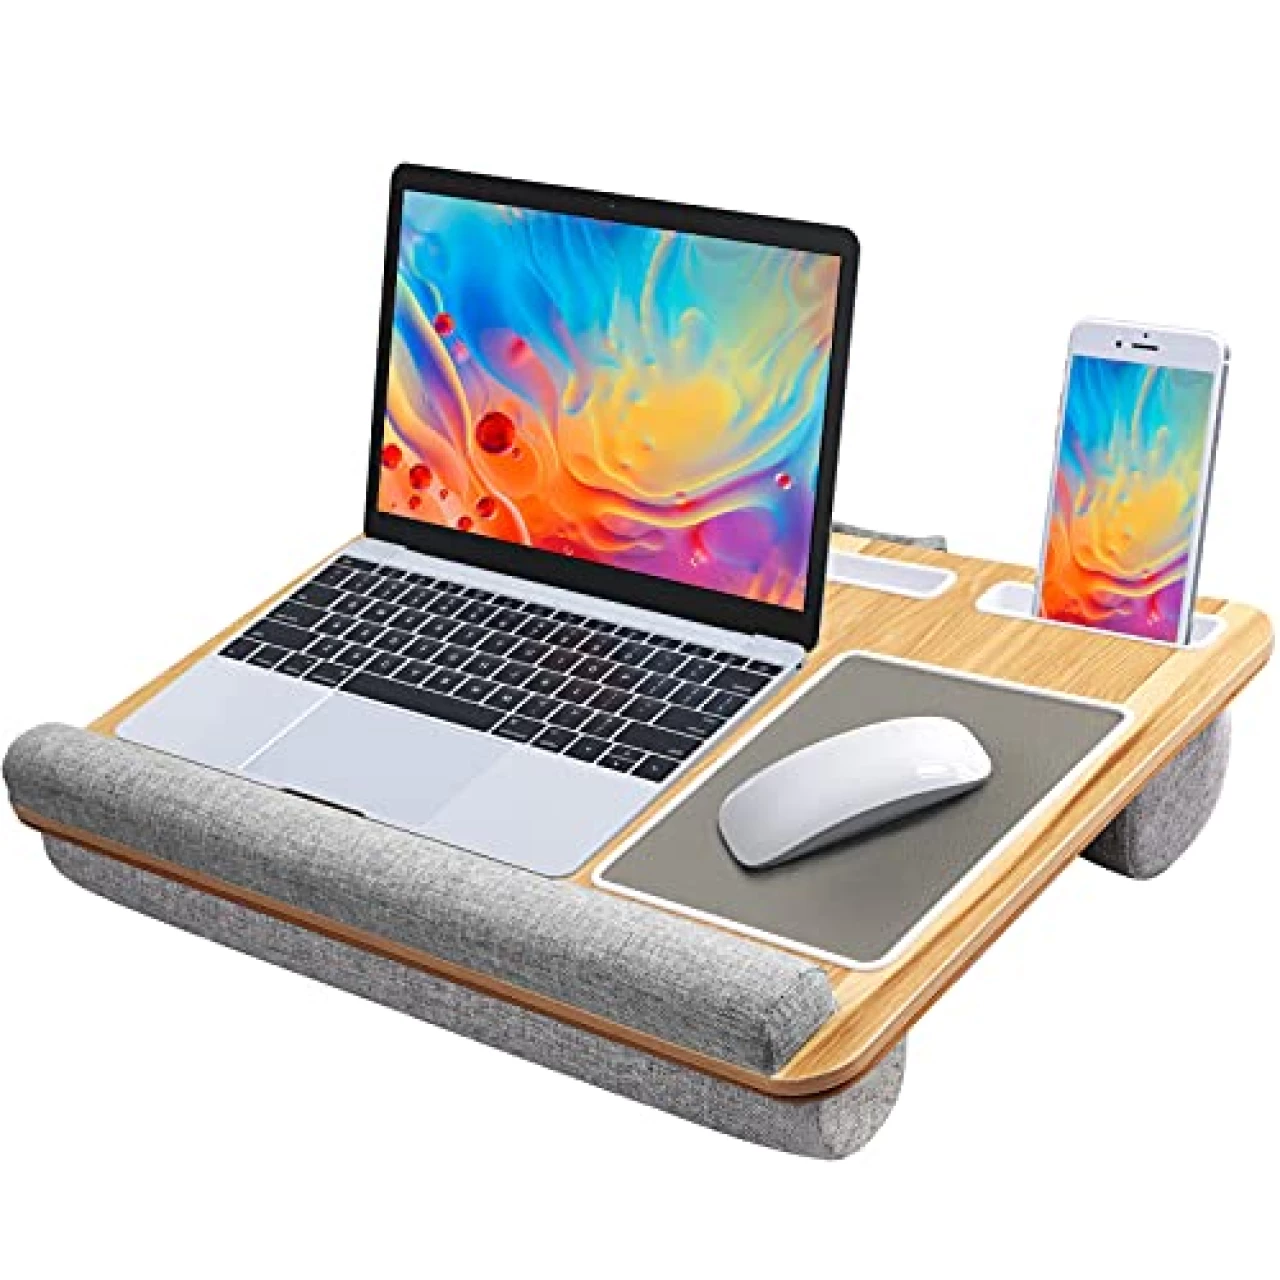 HUANUO Lap Desk - Fits up to 17 inches Laptop Desk, Built in Mouse Pad &amp; Wrist Pad for Notebook, Laptop, Tablet, Laptop Stand with Tablet, Pen &amp; Phone Holder (Wood Grain)